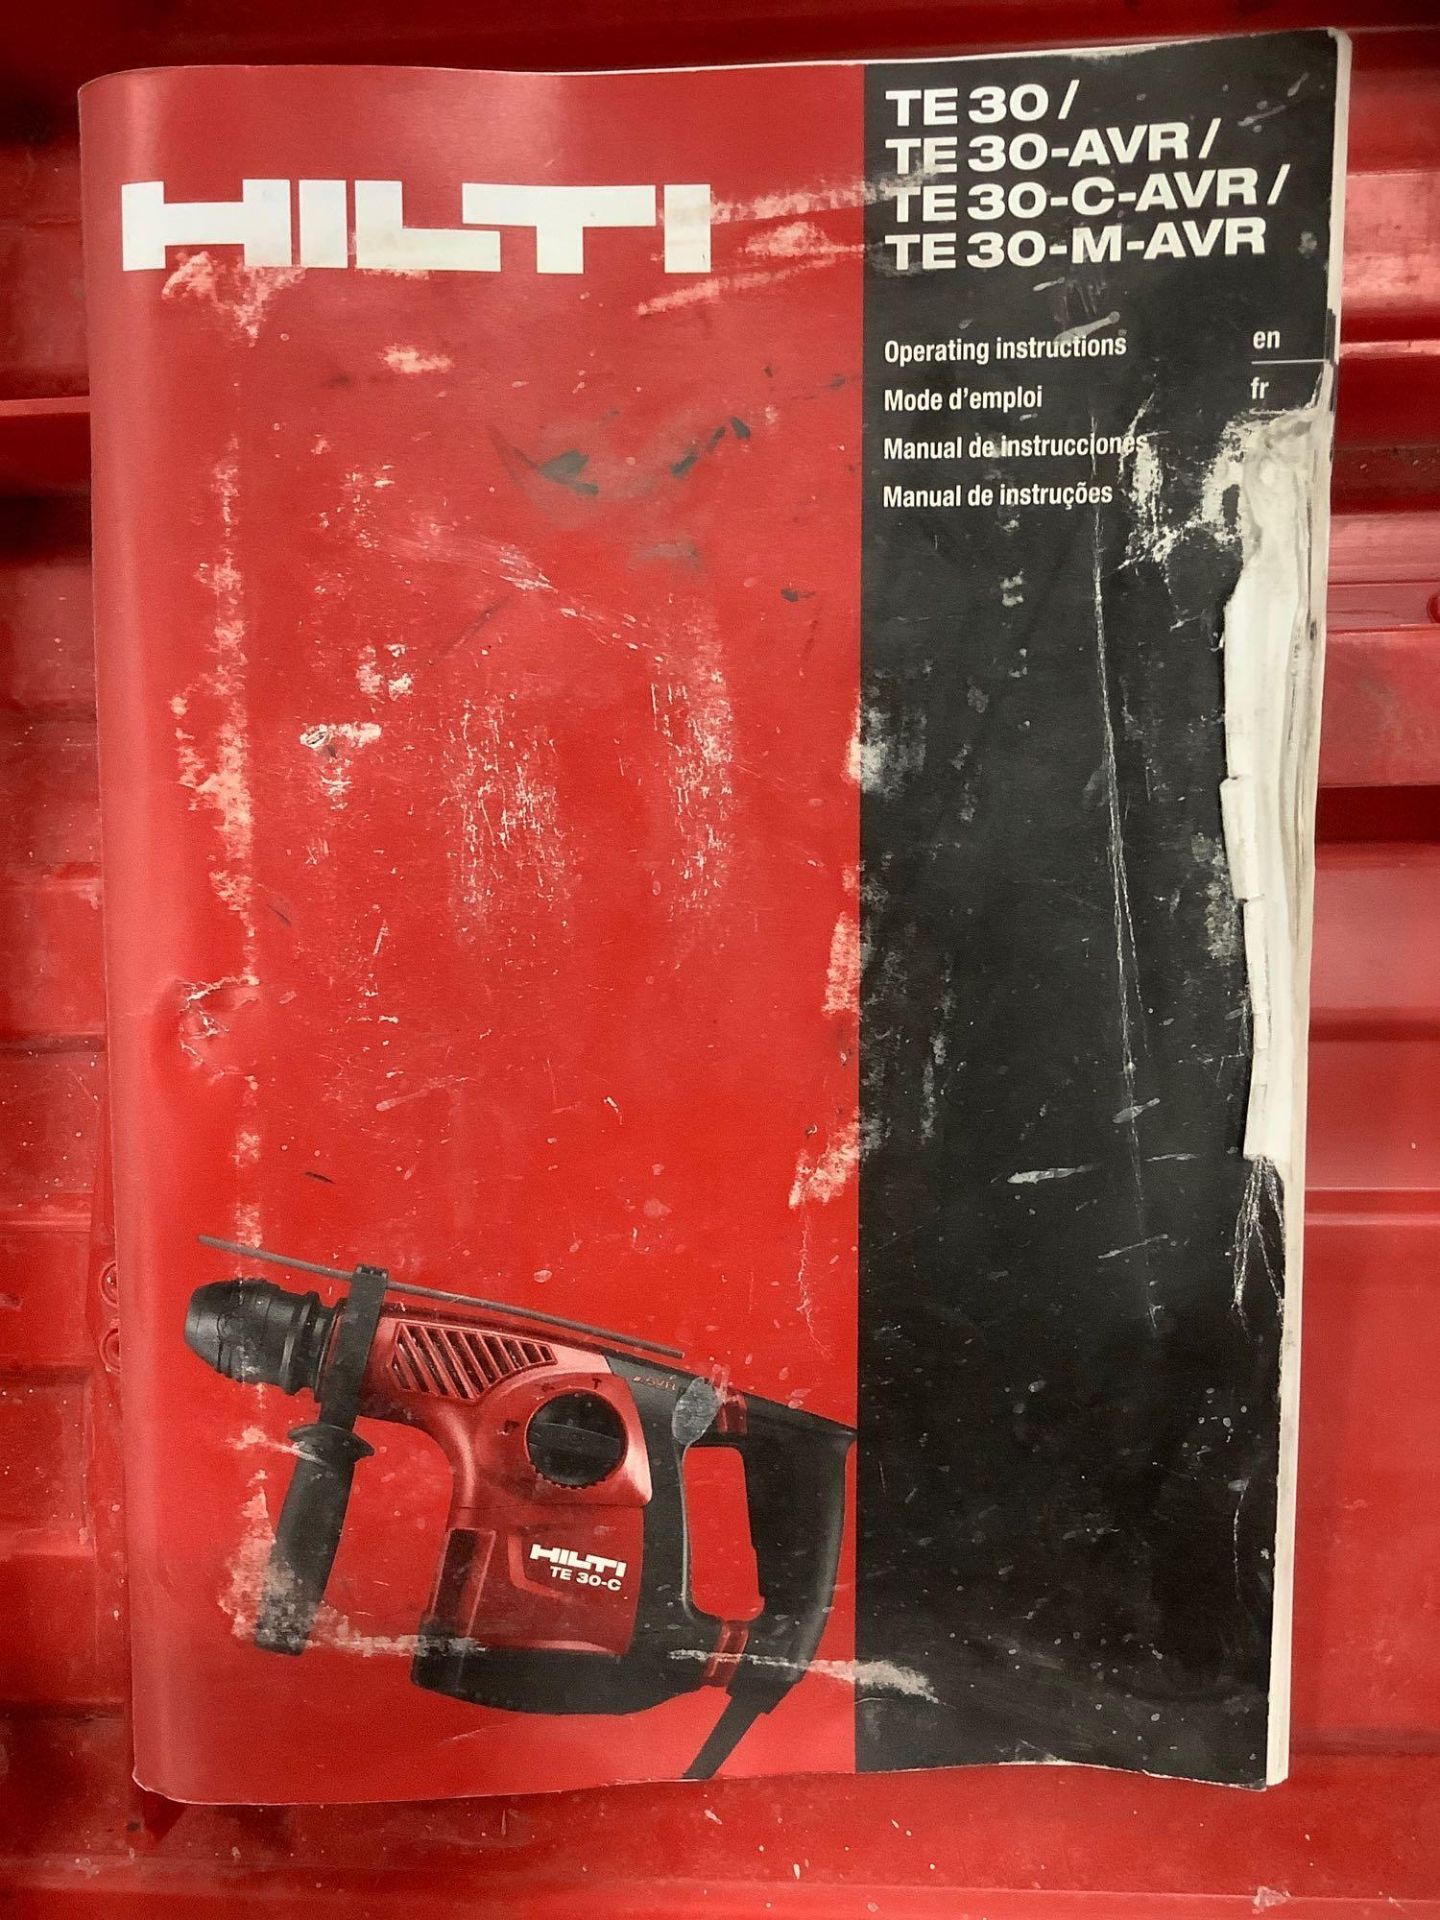 HILTI TE 30-C -AVR ROTARY HAMMER WITH CARRYING CASE - Image 5 of 6